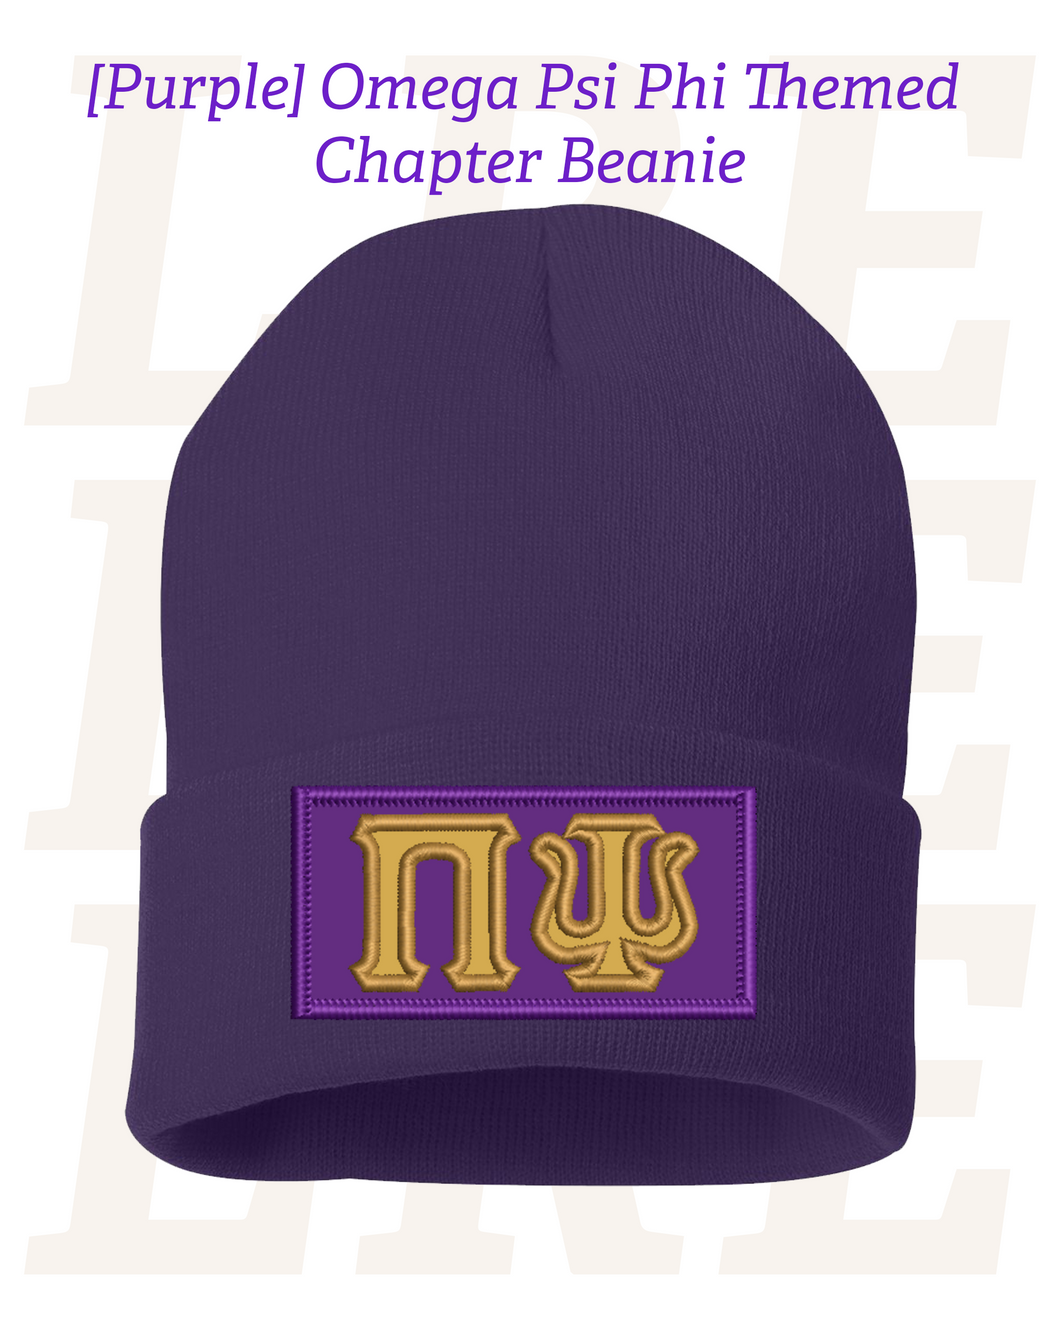 [Purple] Embroidered Omega Psi Phi Themed Chapter Beanie